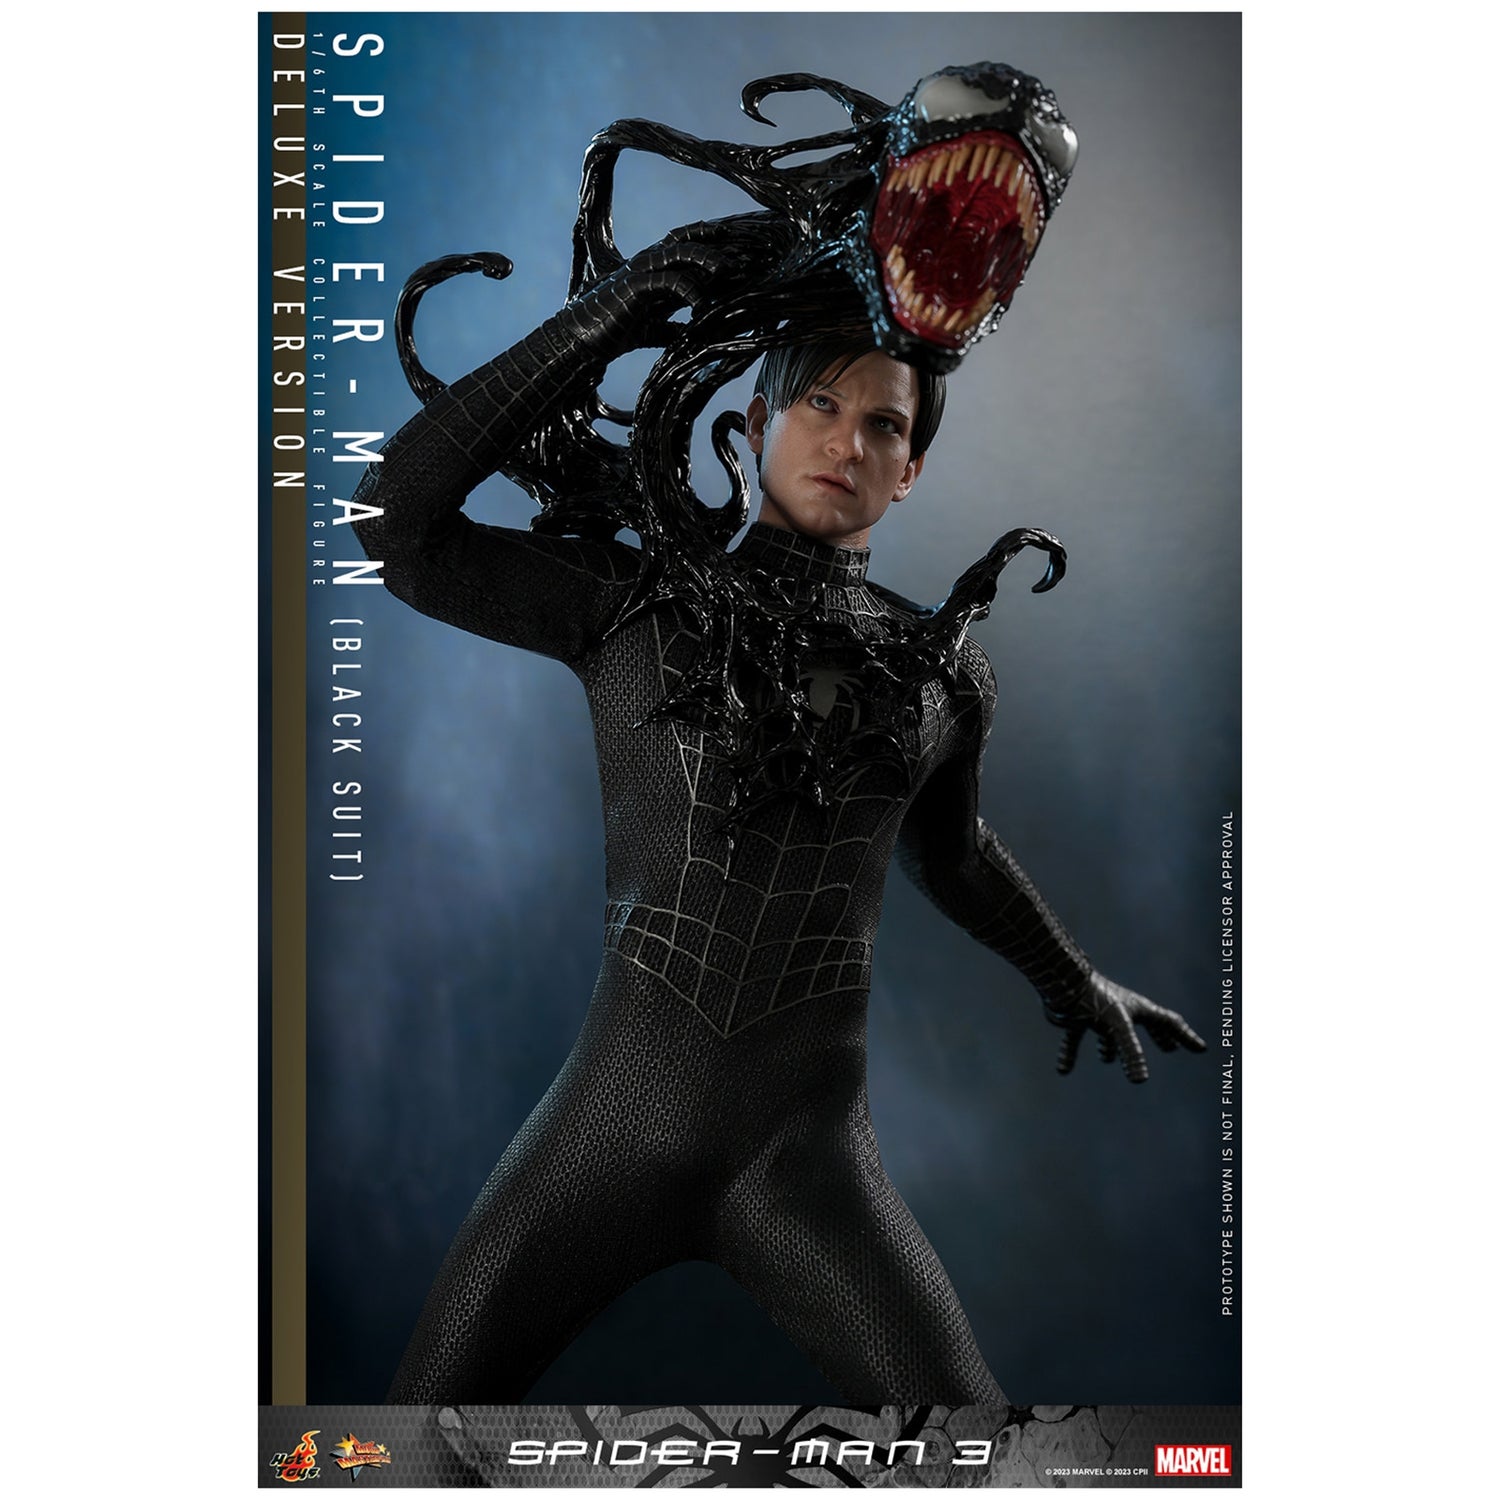 Hot Toys Marvel Spider-Man 3 Deluxe Black Suit Spider-Man 1:6th Scale Collectible Figure